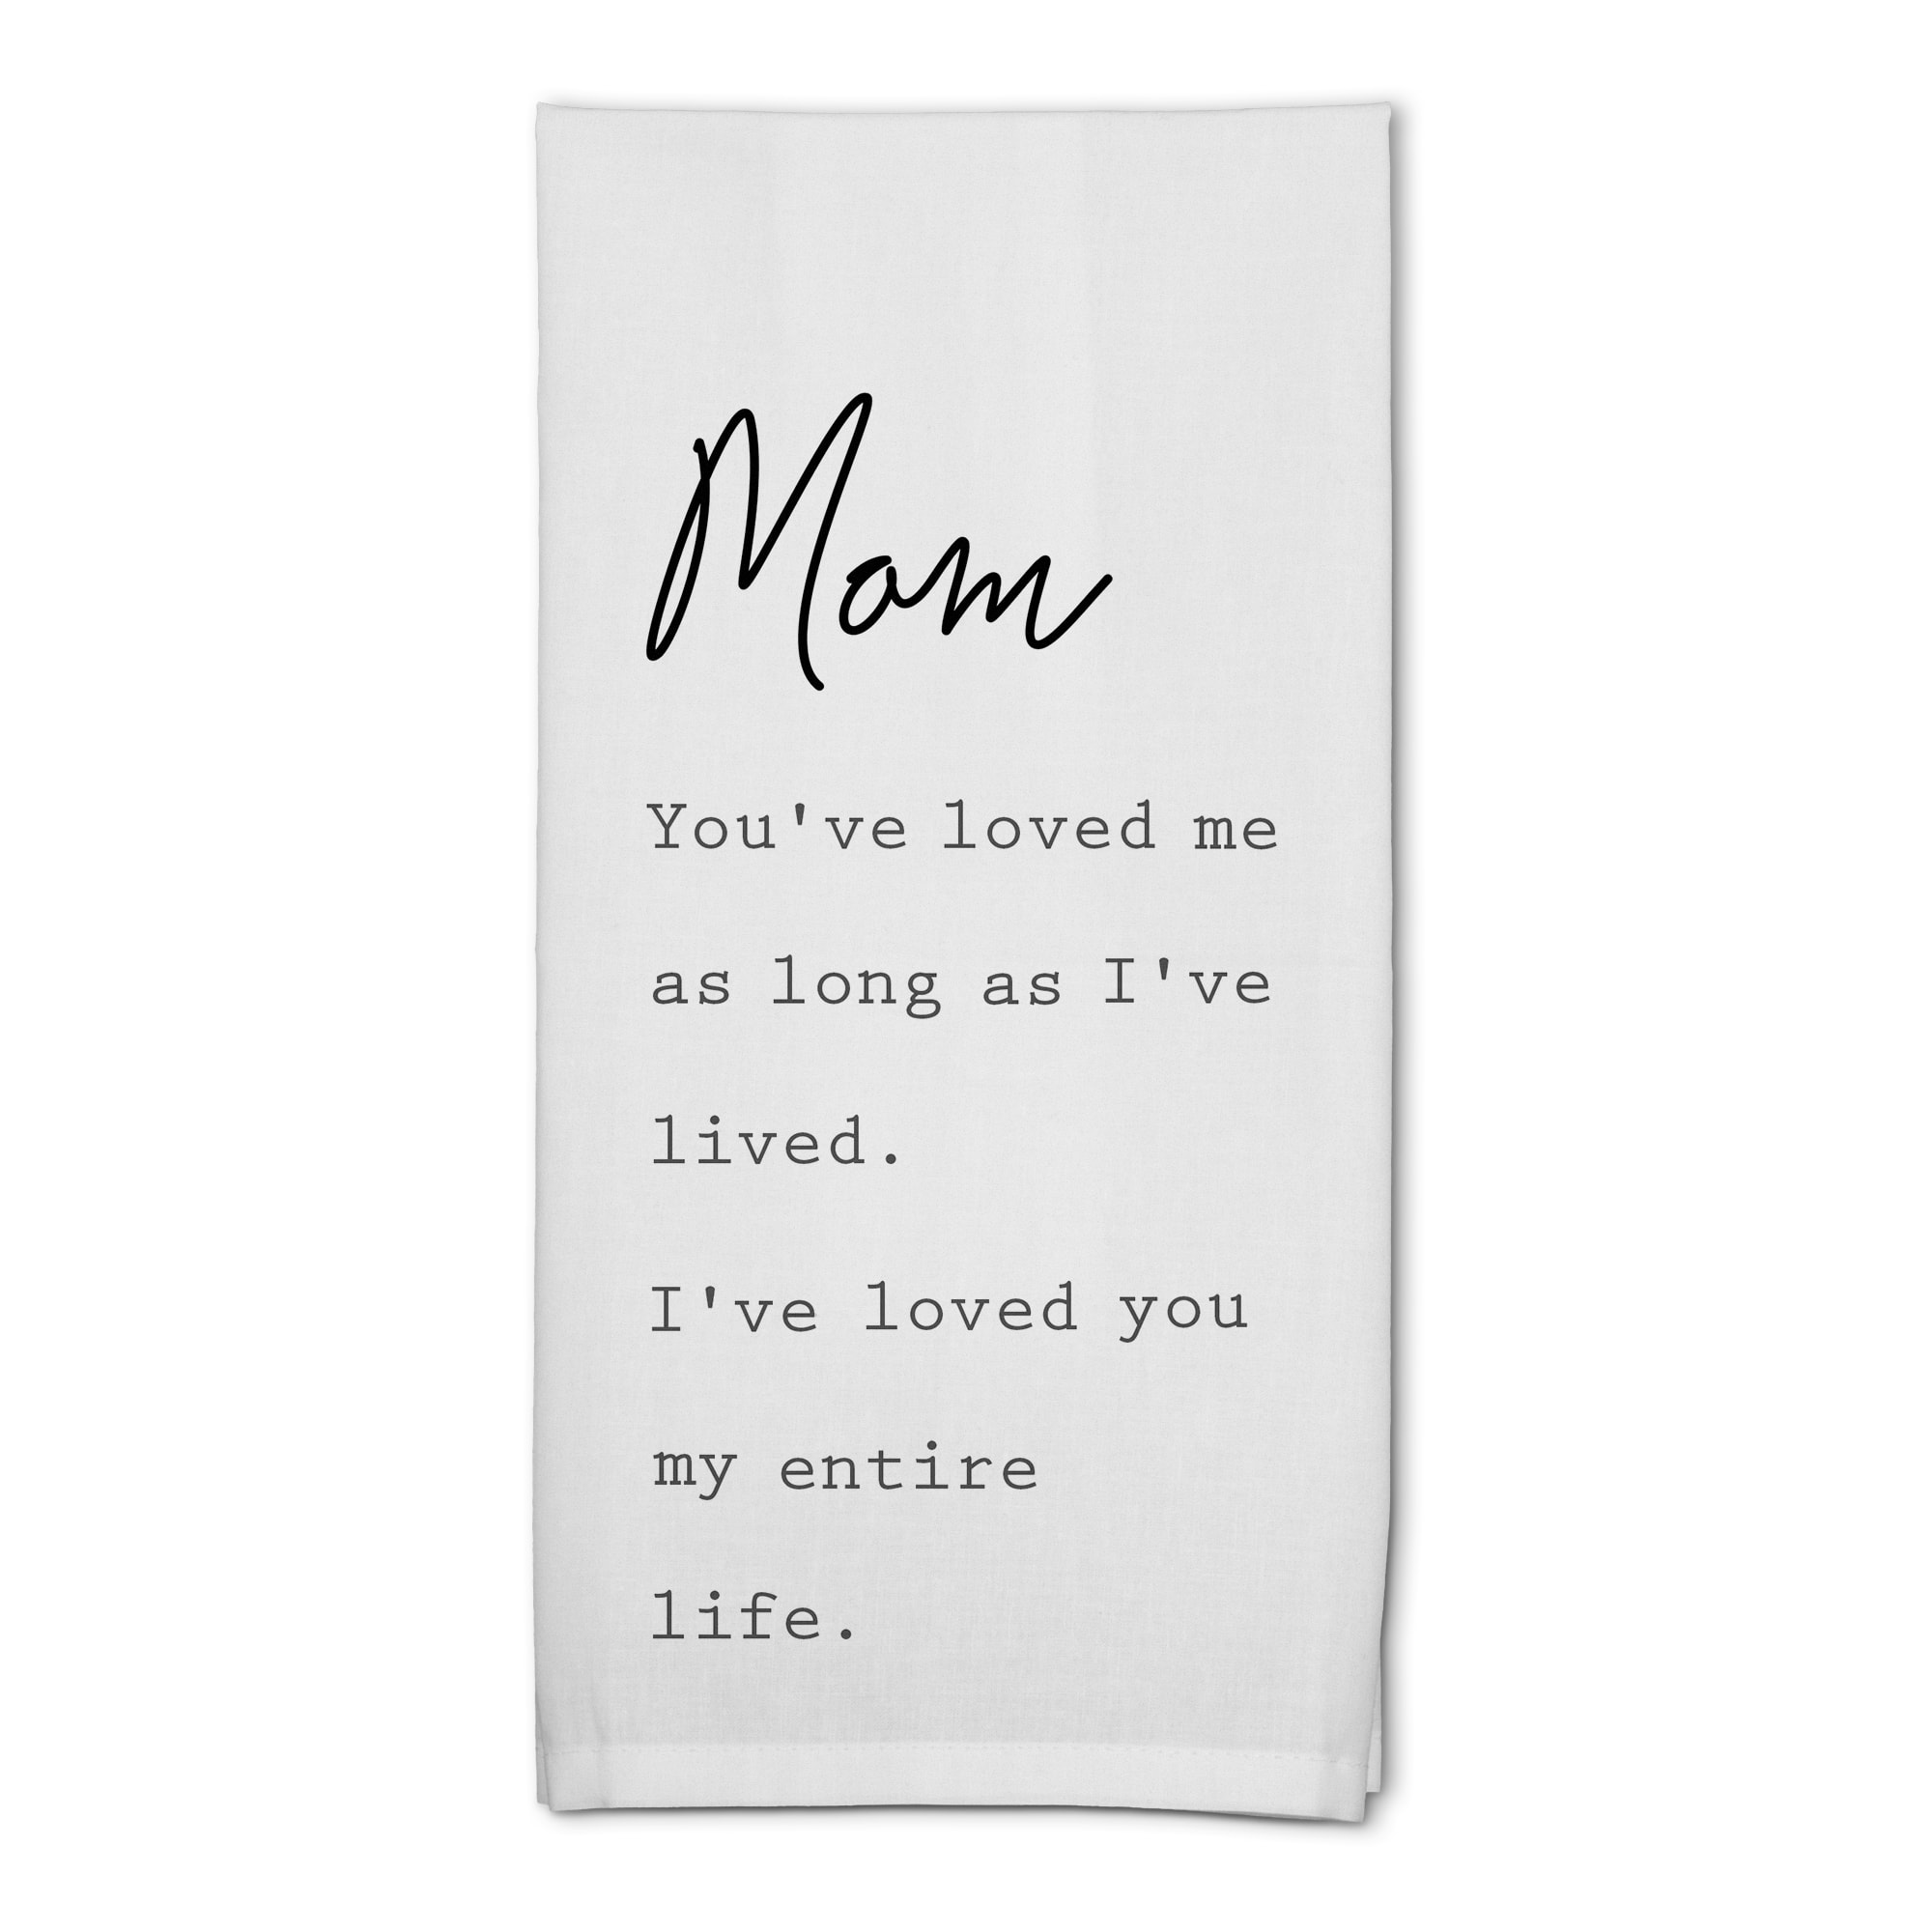 Mom I&#x27;ve Loved You My Entire Life Cotton Twill Tea Towel Set